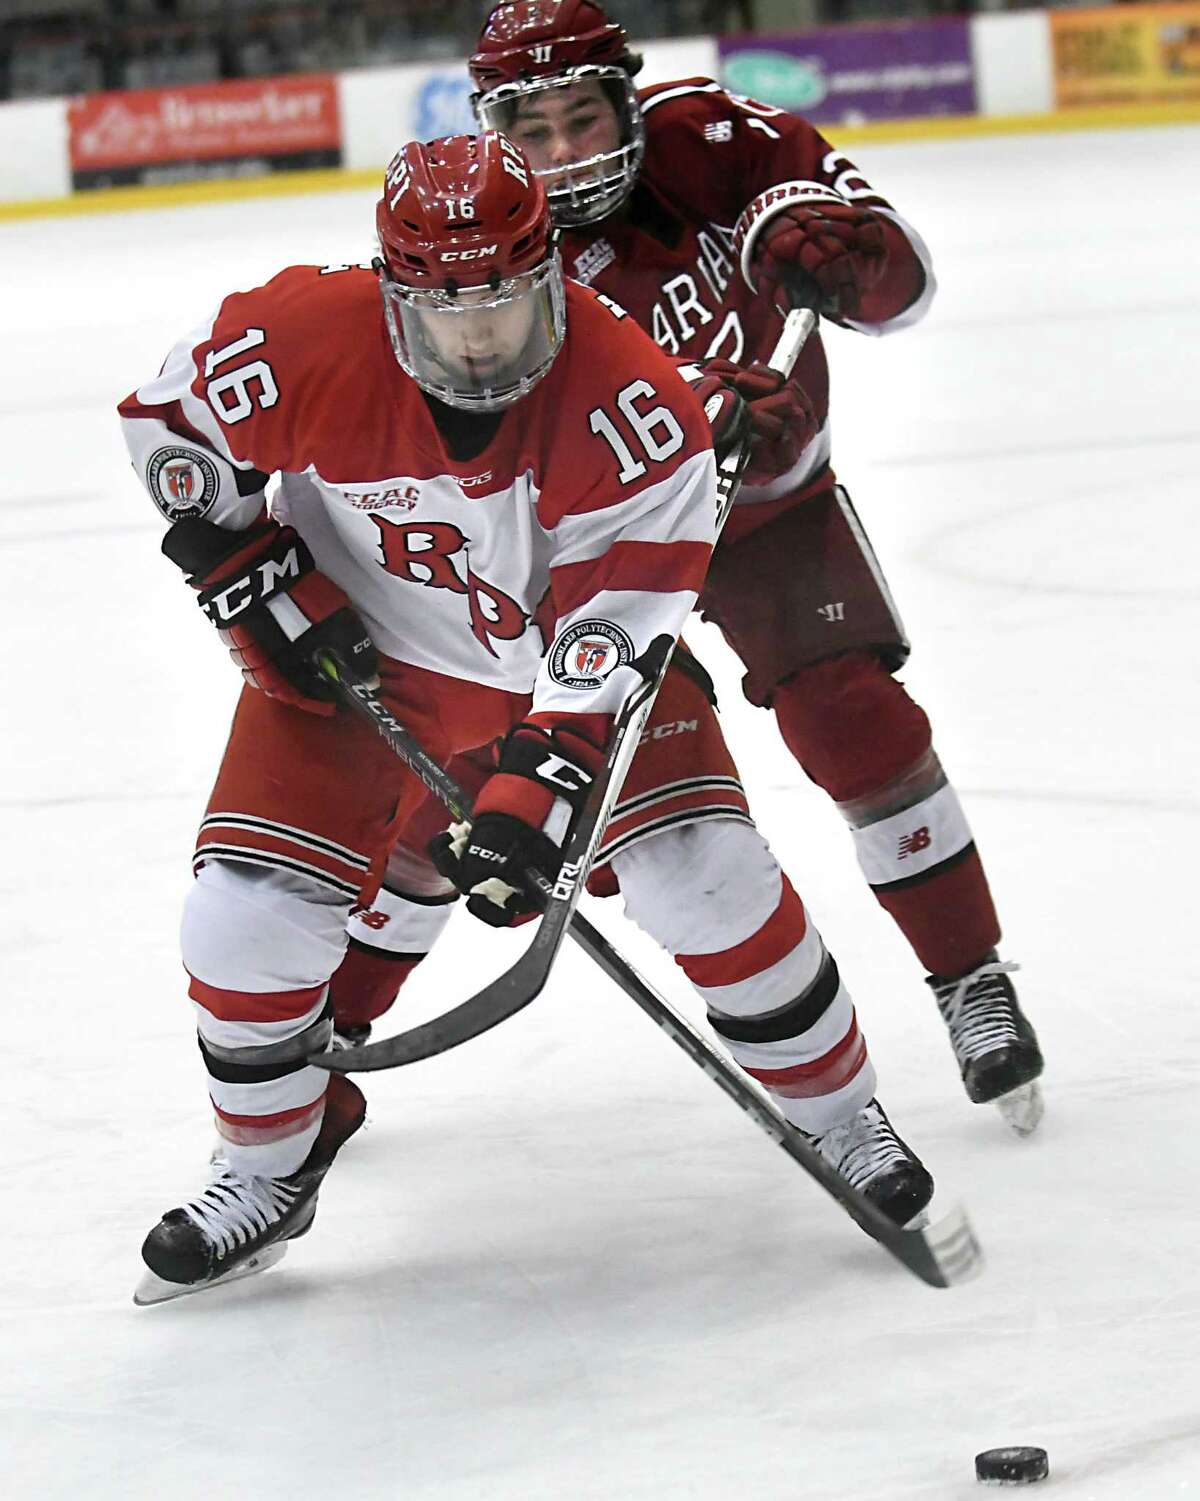 Rensselaer Polytechnic Institute's Jacob Hayhurst is guarded by Harvard's Reilly Walsh during a hockey game at RPI Houston Field House on Tuesday Jan. 9, 2018 in Troy, N.Y. (Lori Van Buren / Times Union)